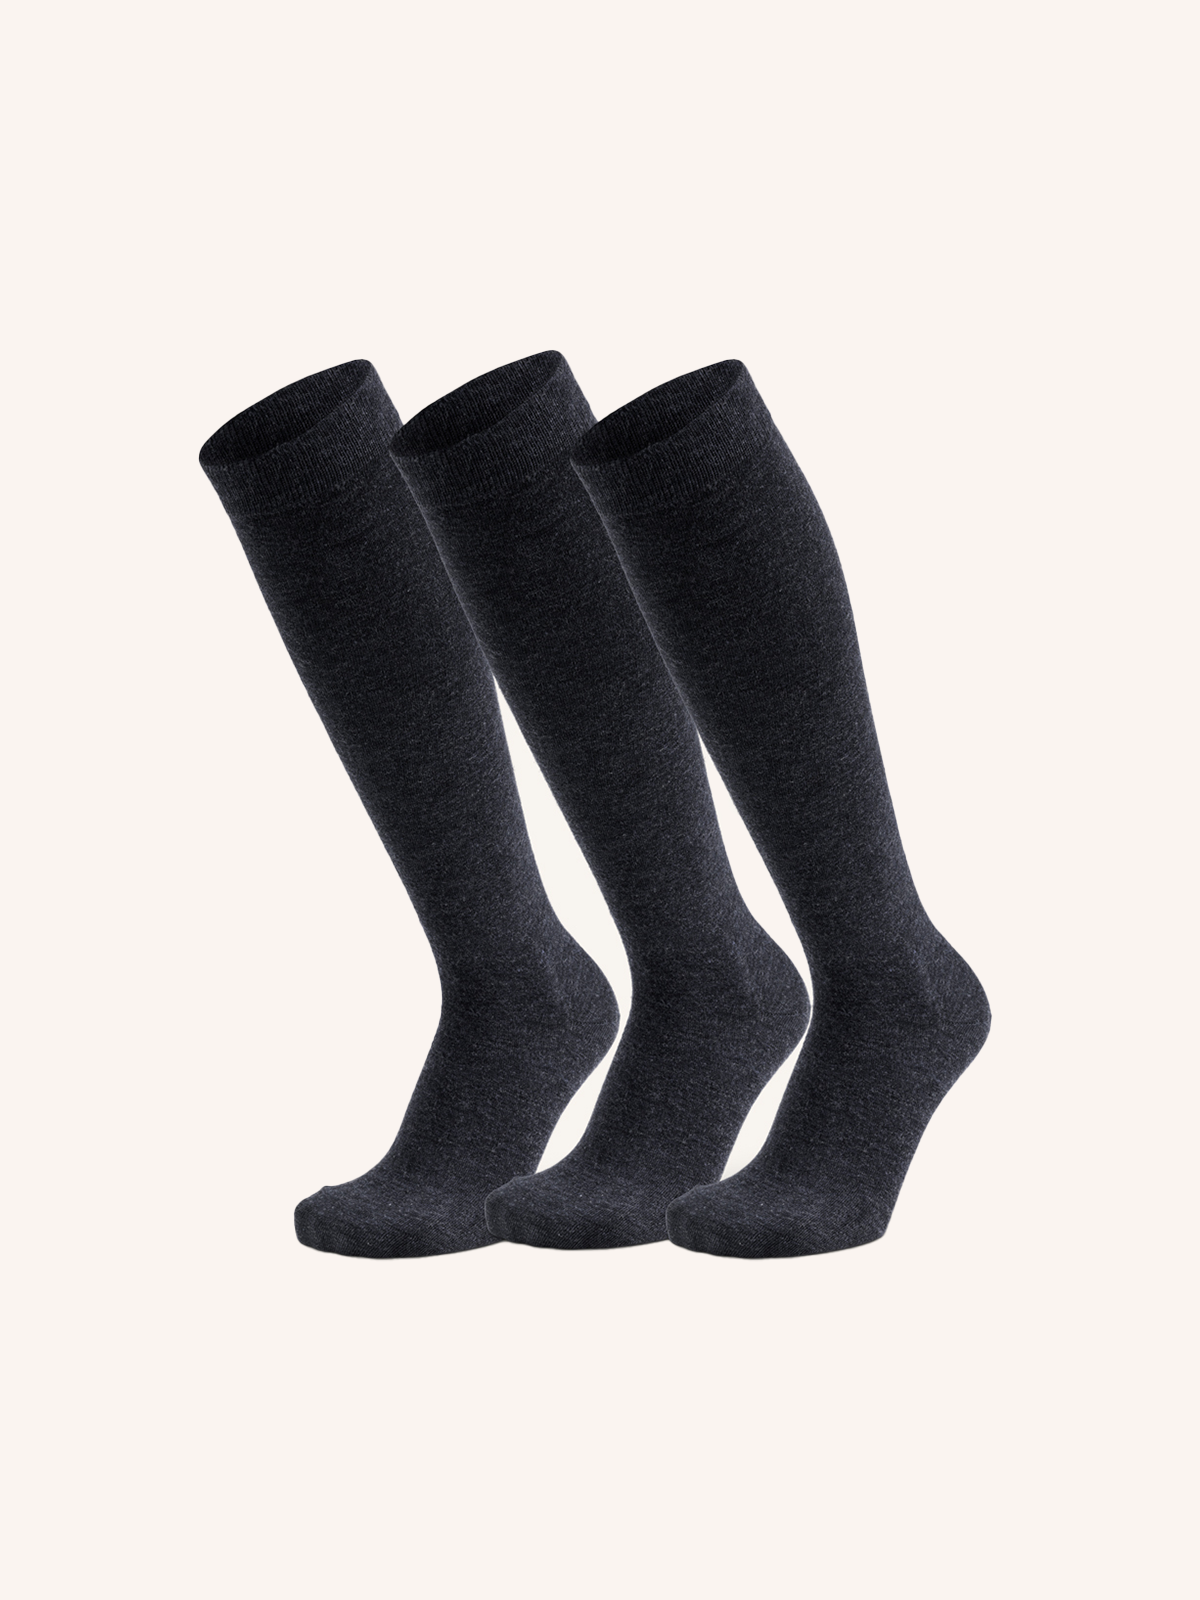 Long Socks in Cashmere and Viscose for Women | Plain Color | Pack of 3 Pairs | Ultra DL